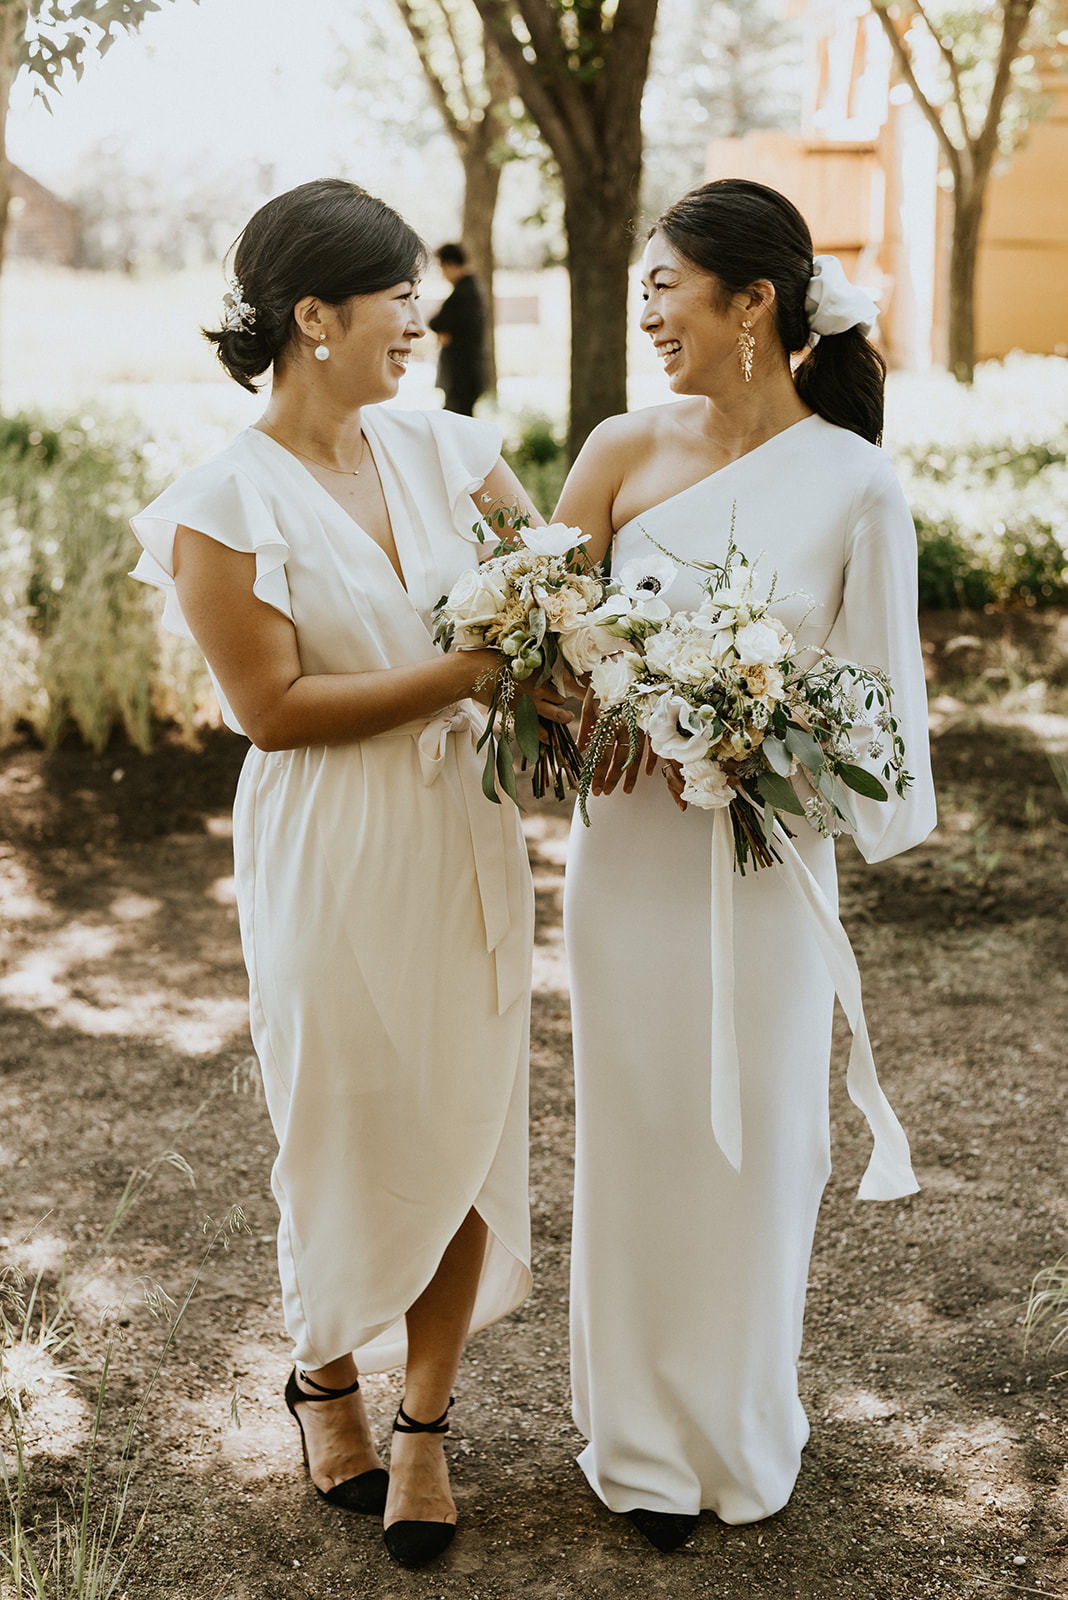 Moody Tones & Minimalist Bridal Style at This Contemporary Summer Wedding at The Coutts Centre featured on Brontë Bride White Bridesmaids Dress